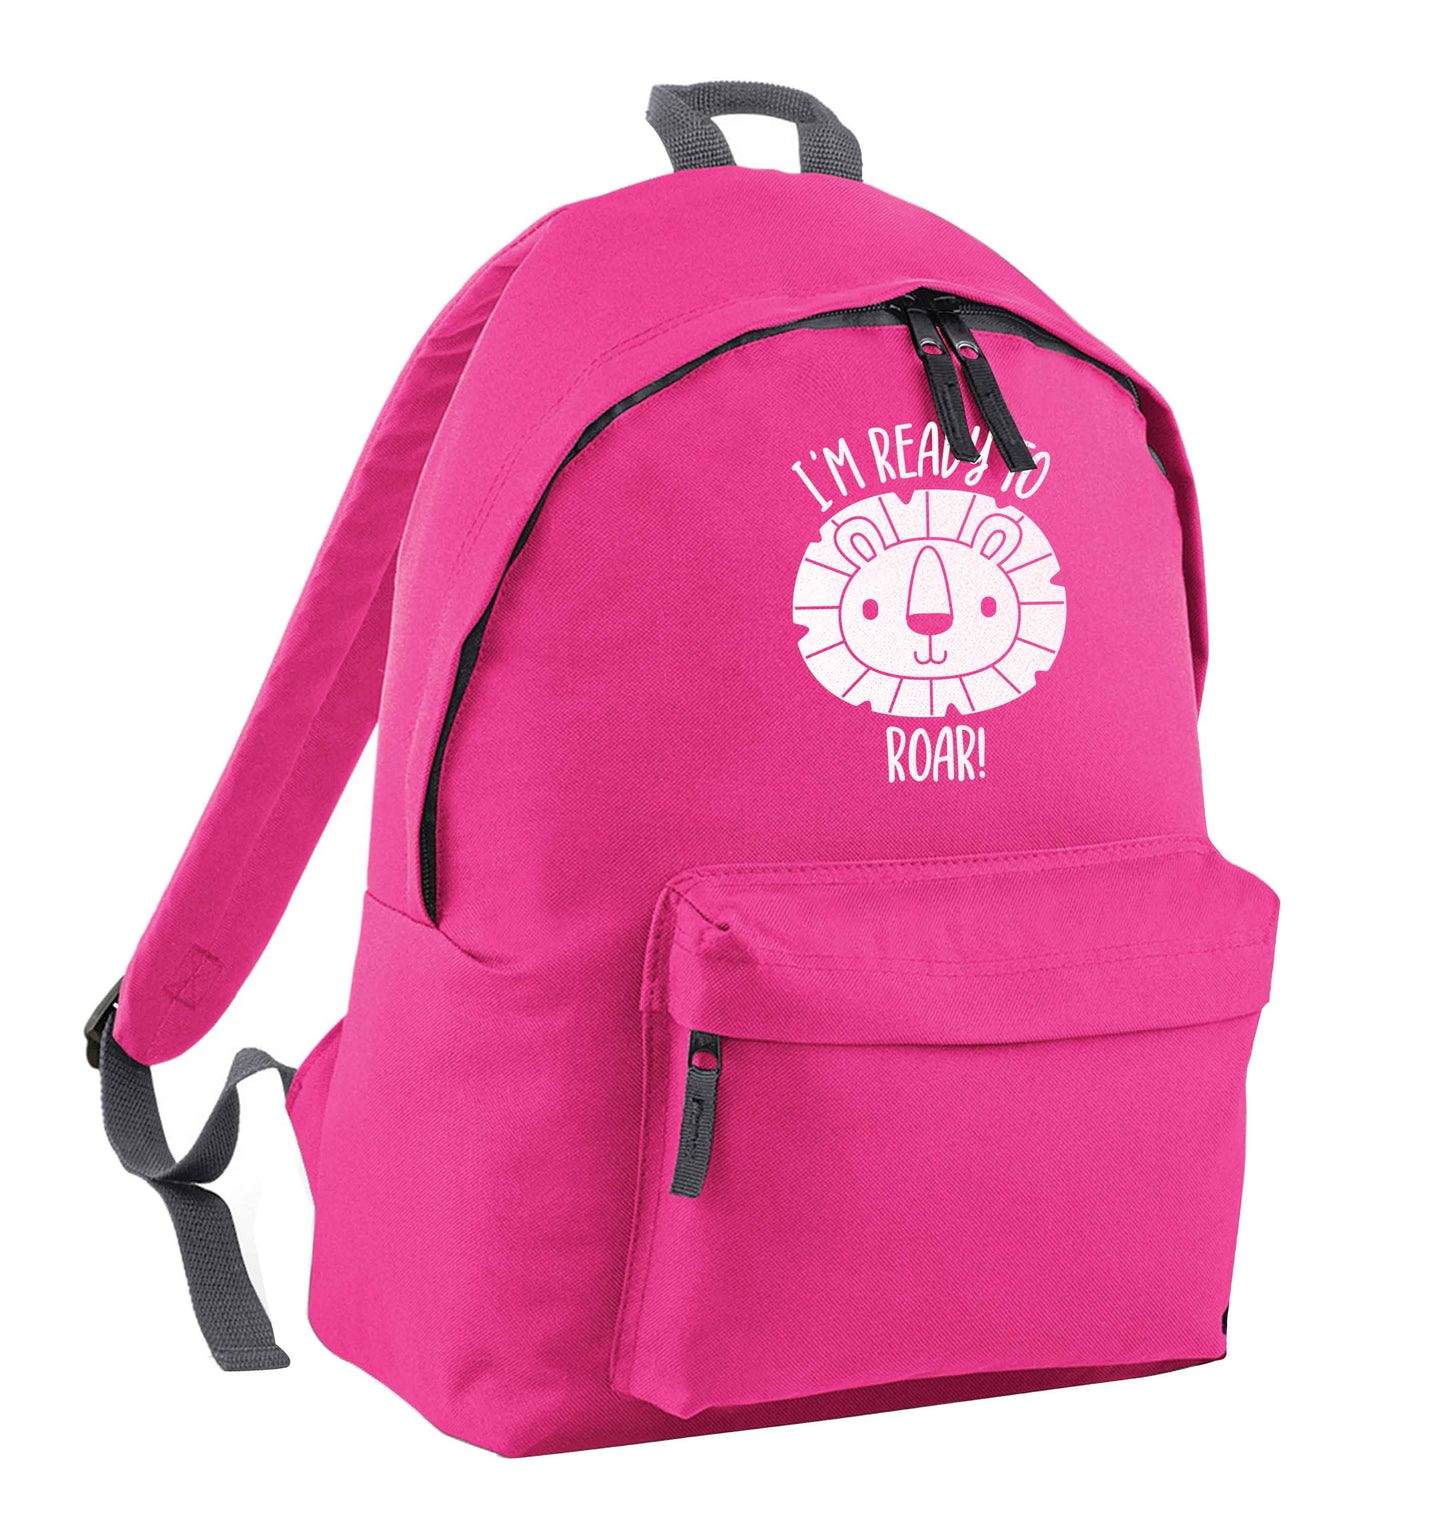 I'm ready to rawr pink children's backpack